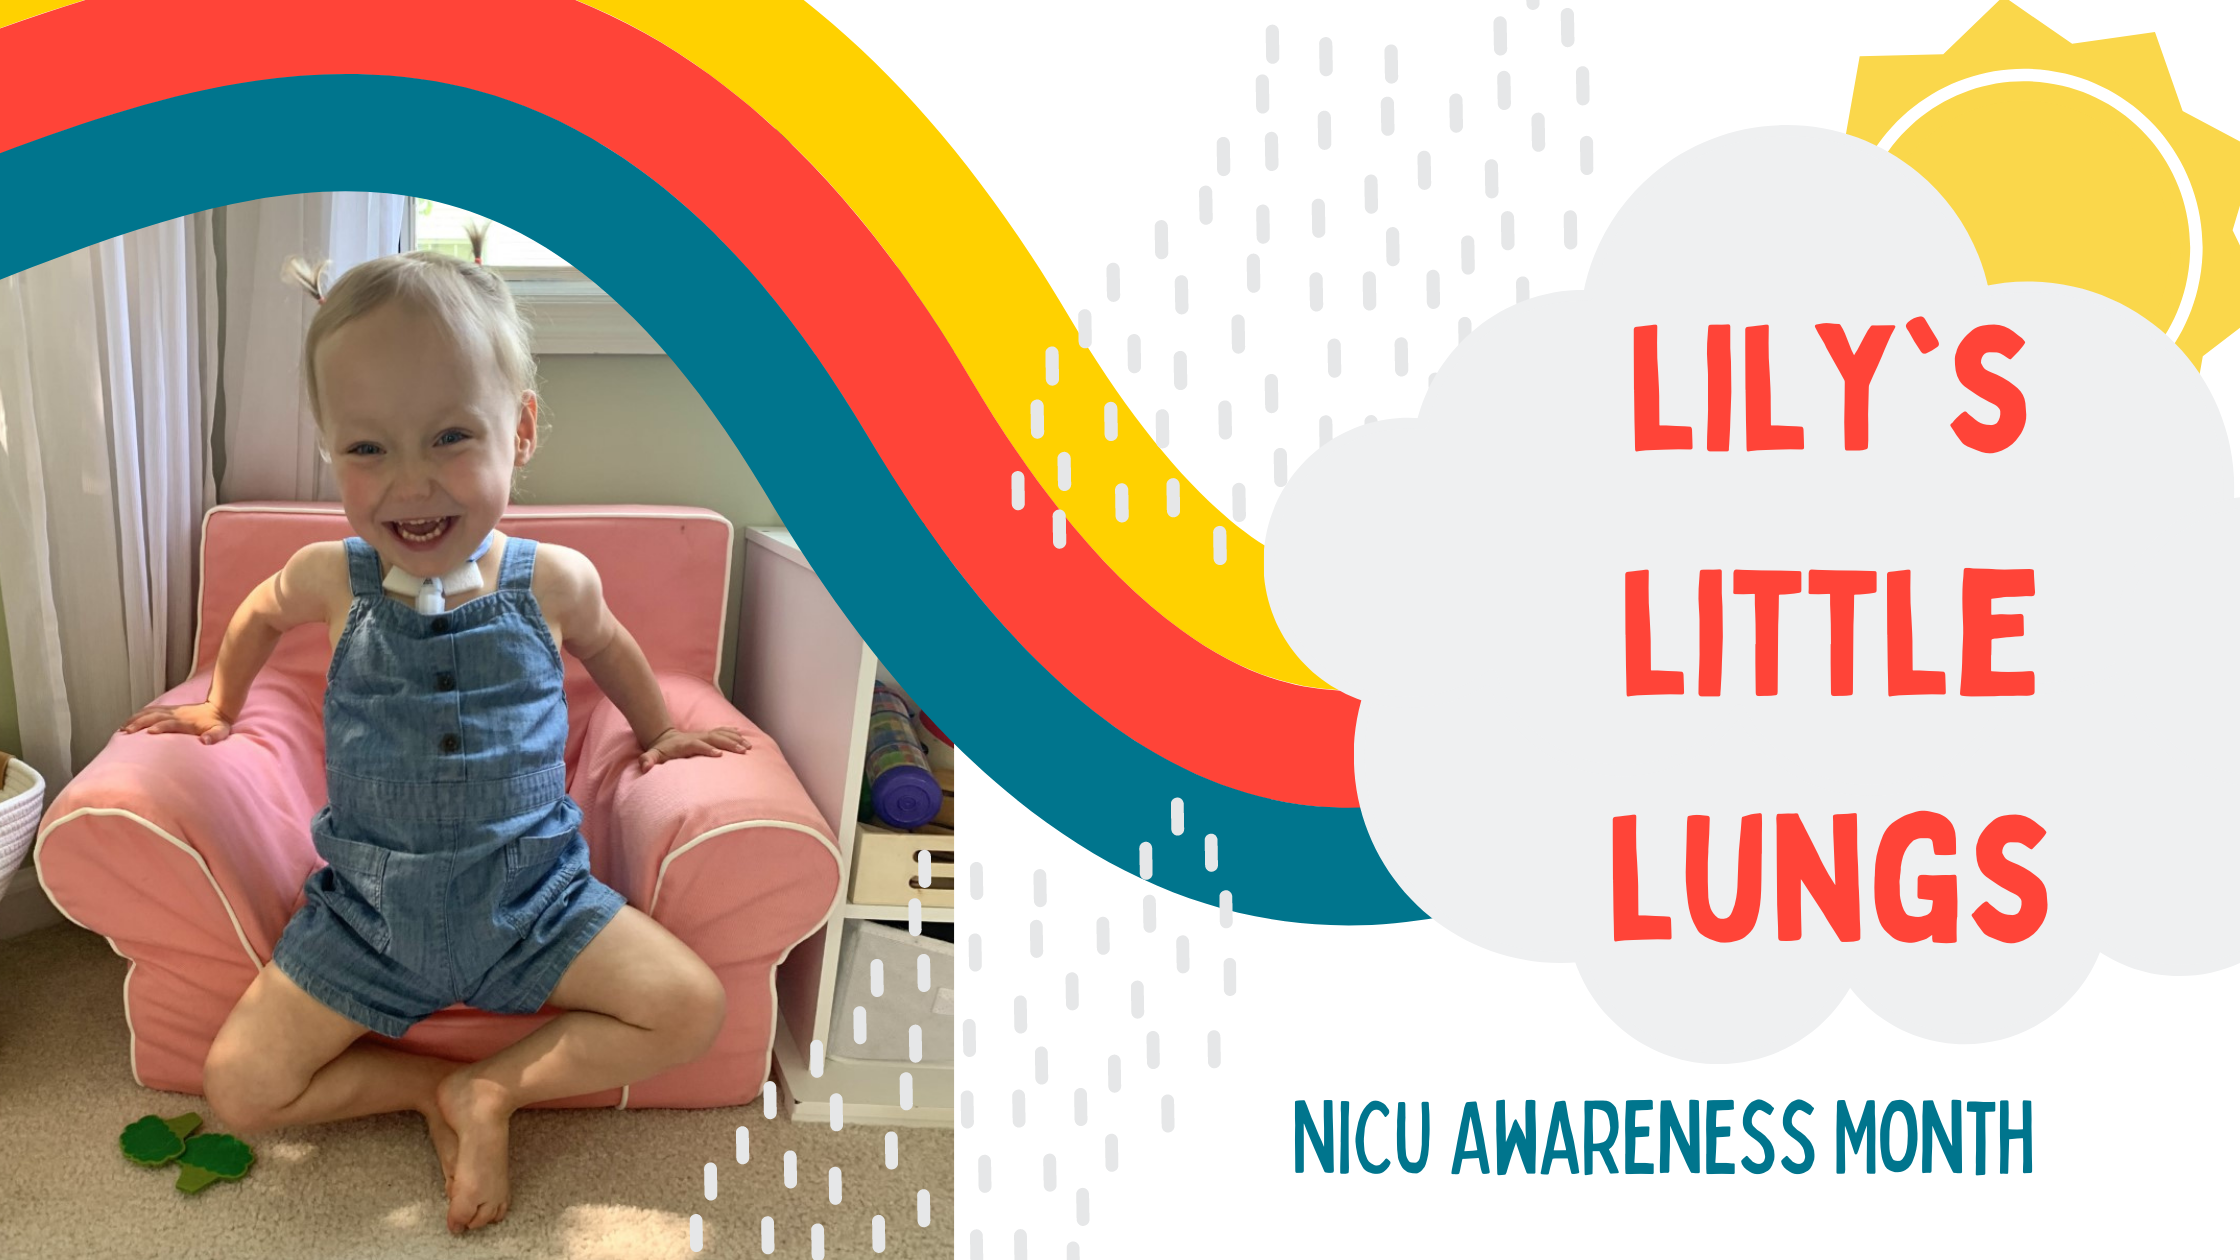 graphic with rainbow and cloud with text "lilys little lungs Nicu awareness month" with image of lily